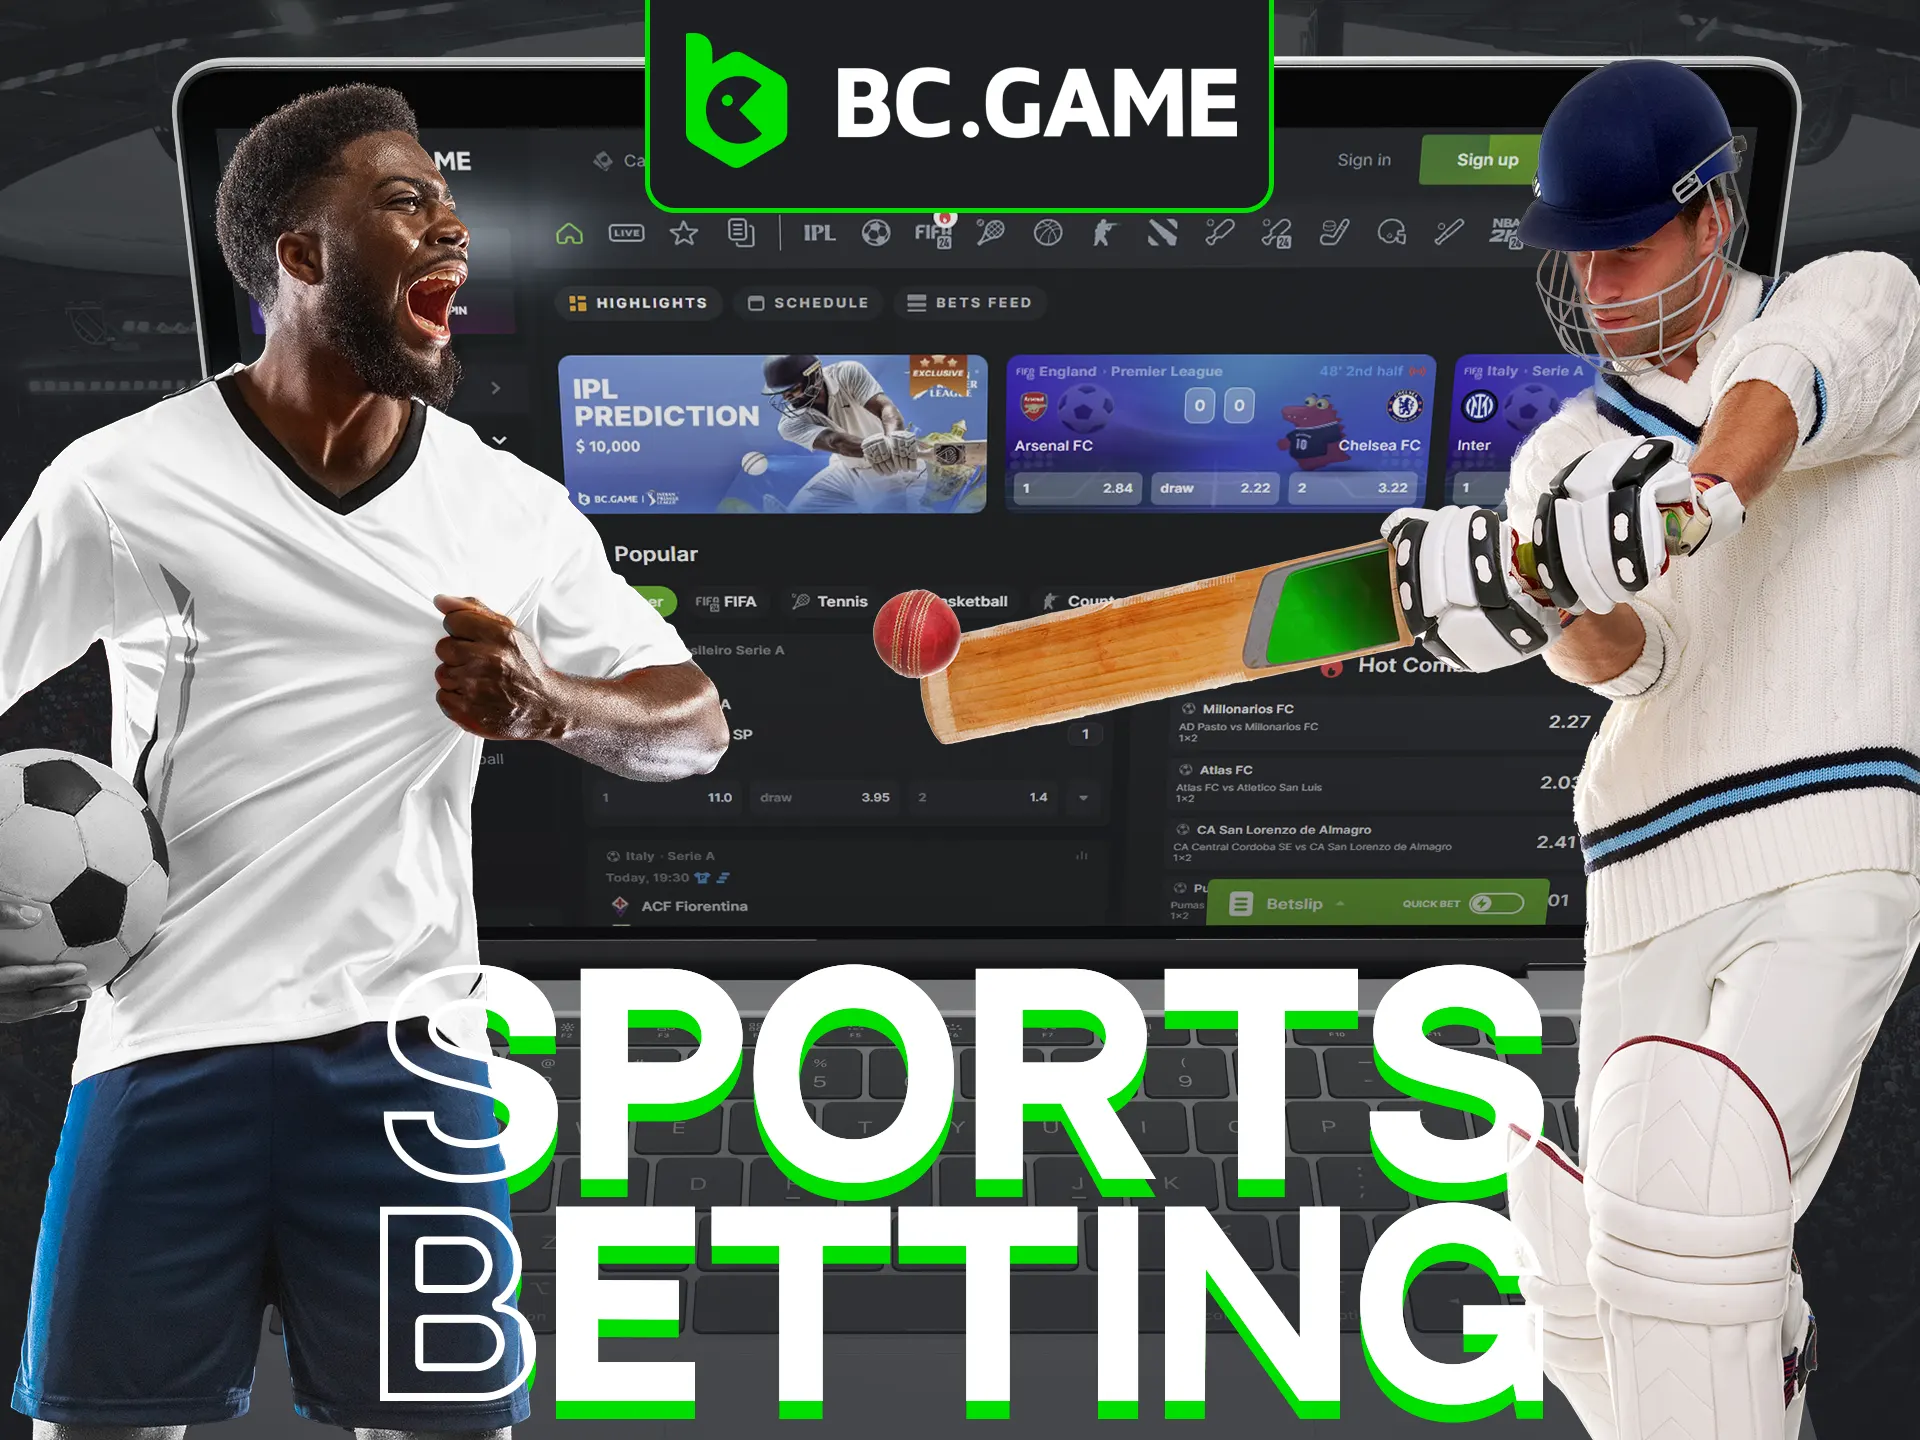 Sports betting section at BC Game offers a wide variety of sports bets.